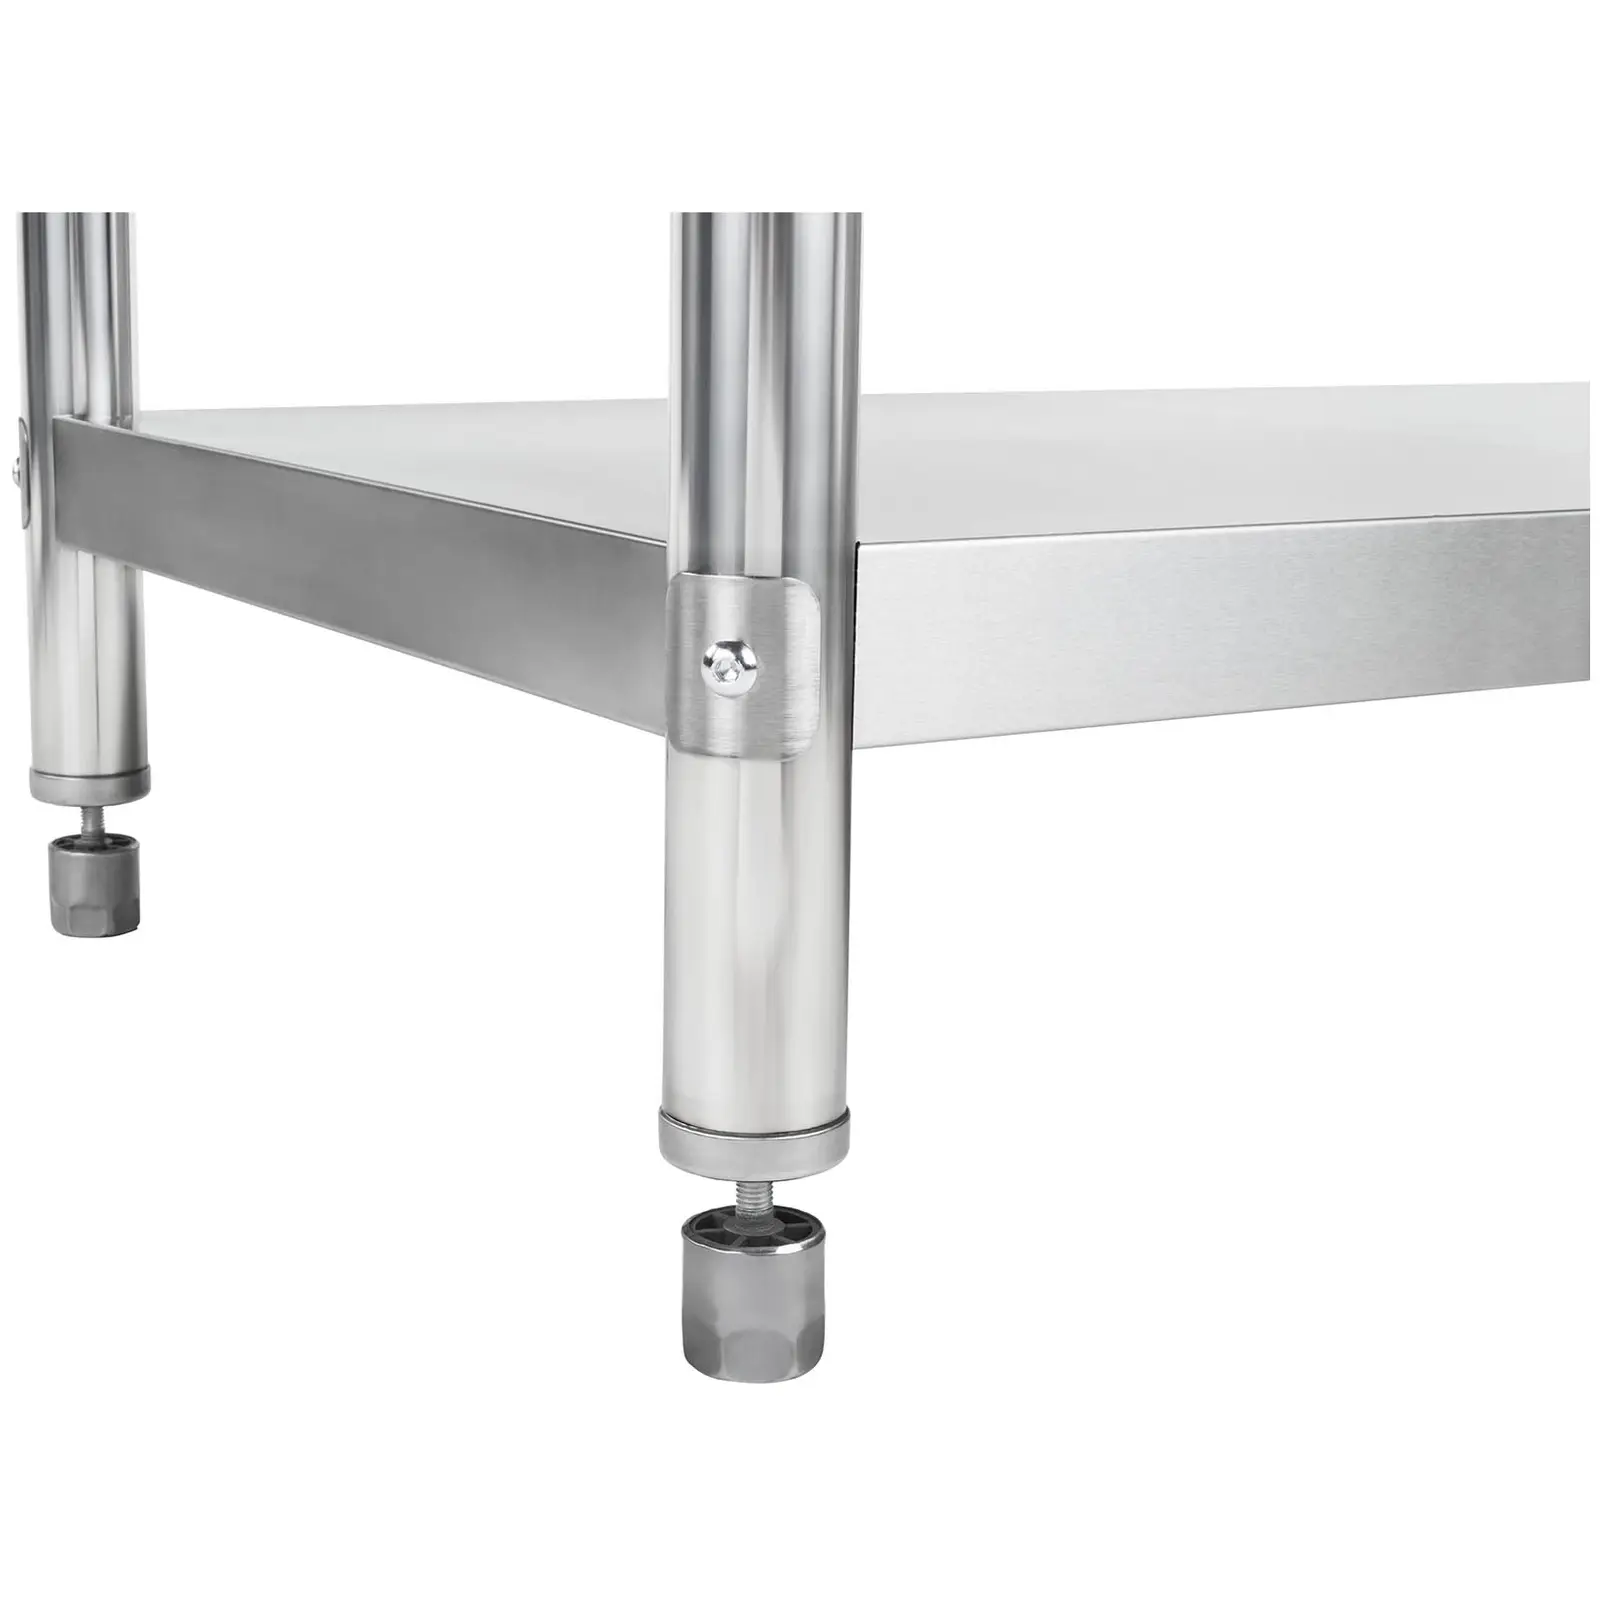 Stainless Steel Table - 120 x 60 cm - 137 kg loading capacity